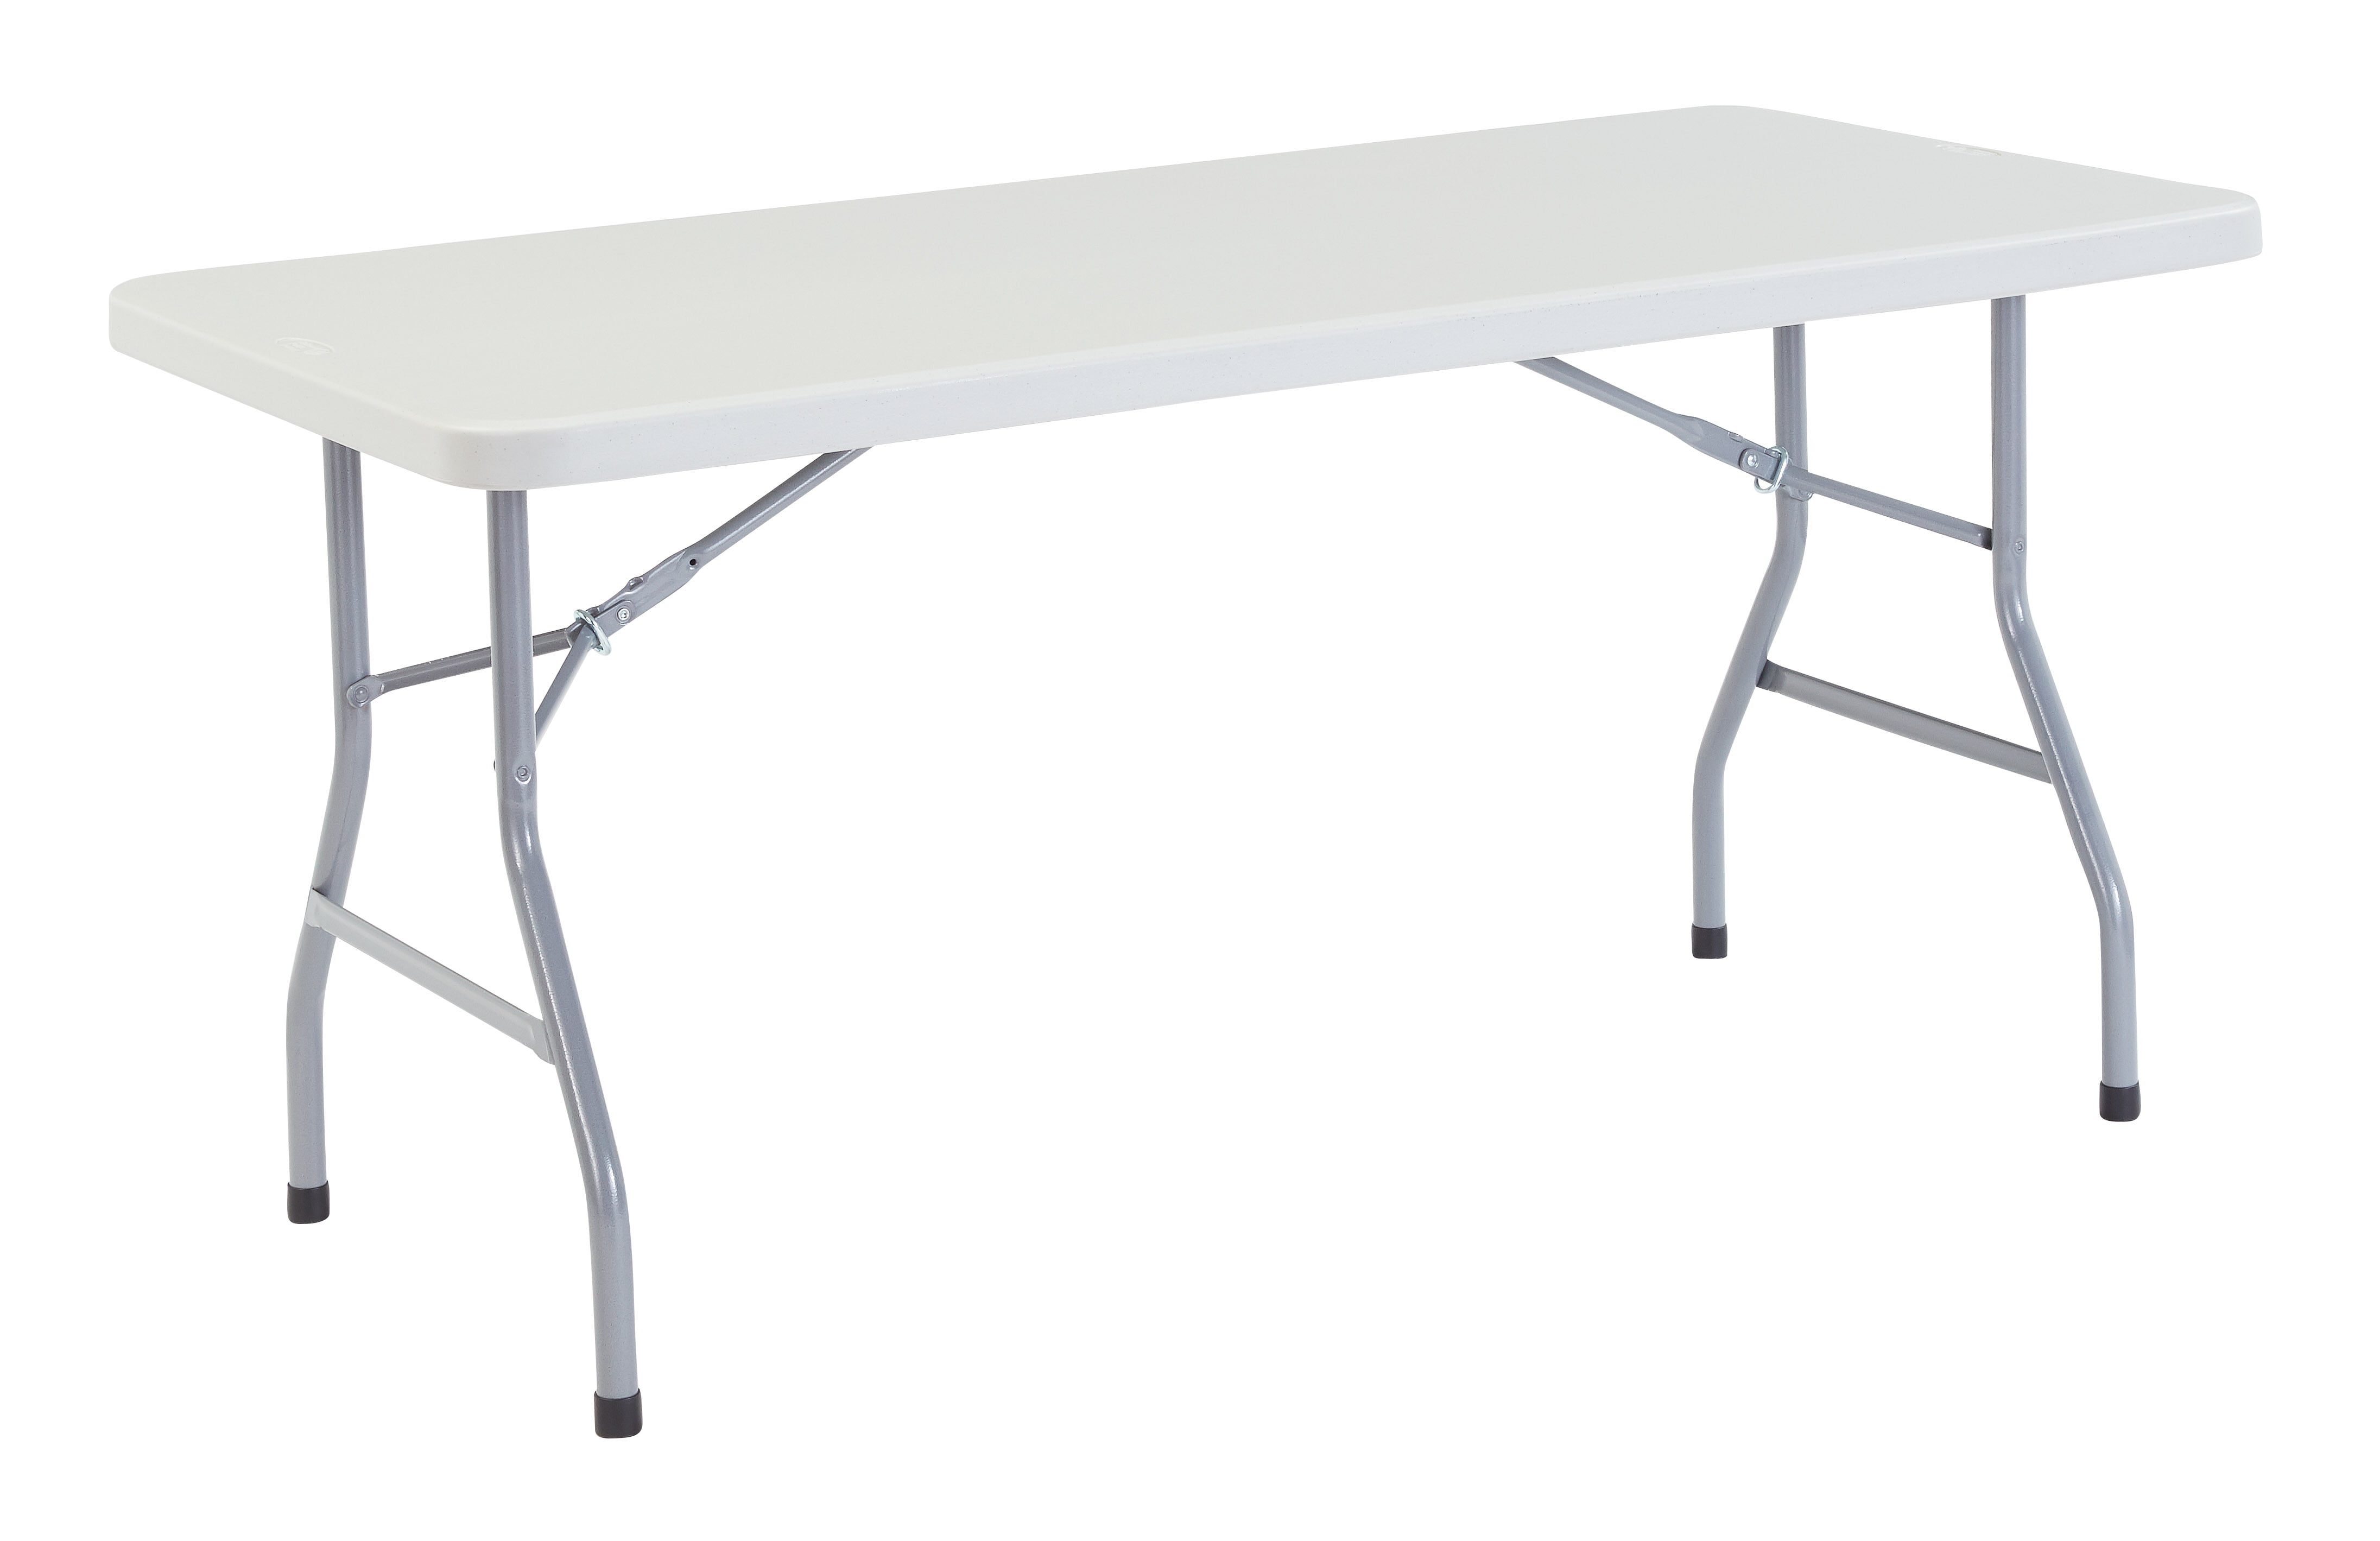 Details about   6 Foot Centerfold Folding Events Catering Party Tailgate Holiday Plastic Table 